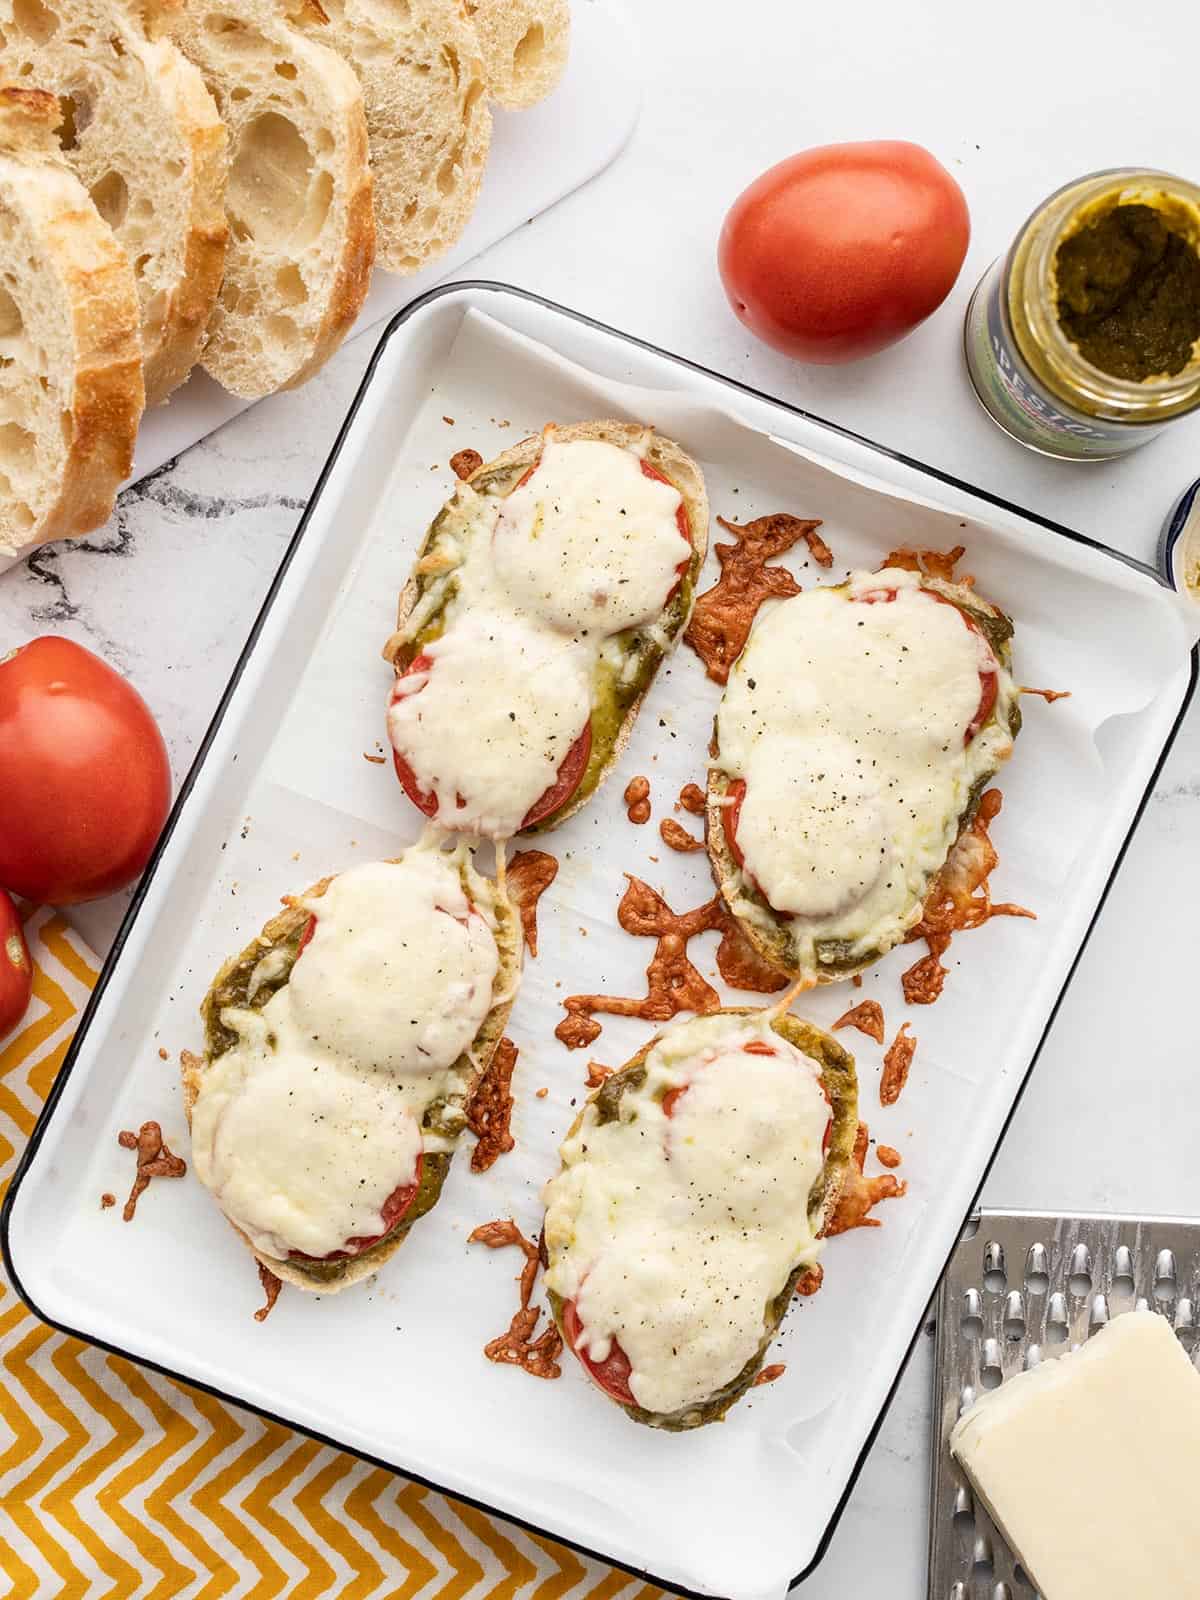 Pesto cheese toast on a baking sheet with bread, tomatoes and cheese on the sides